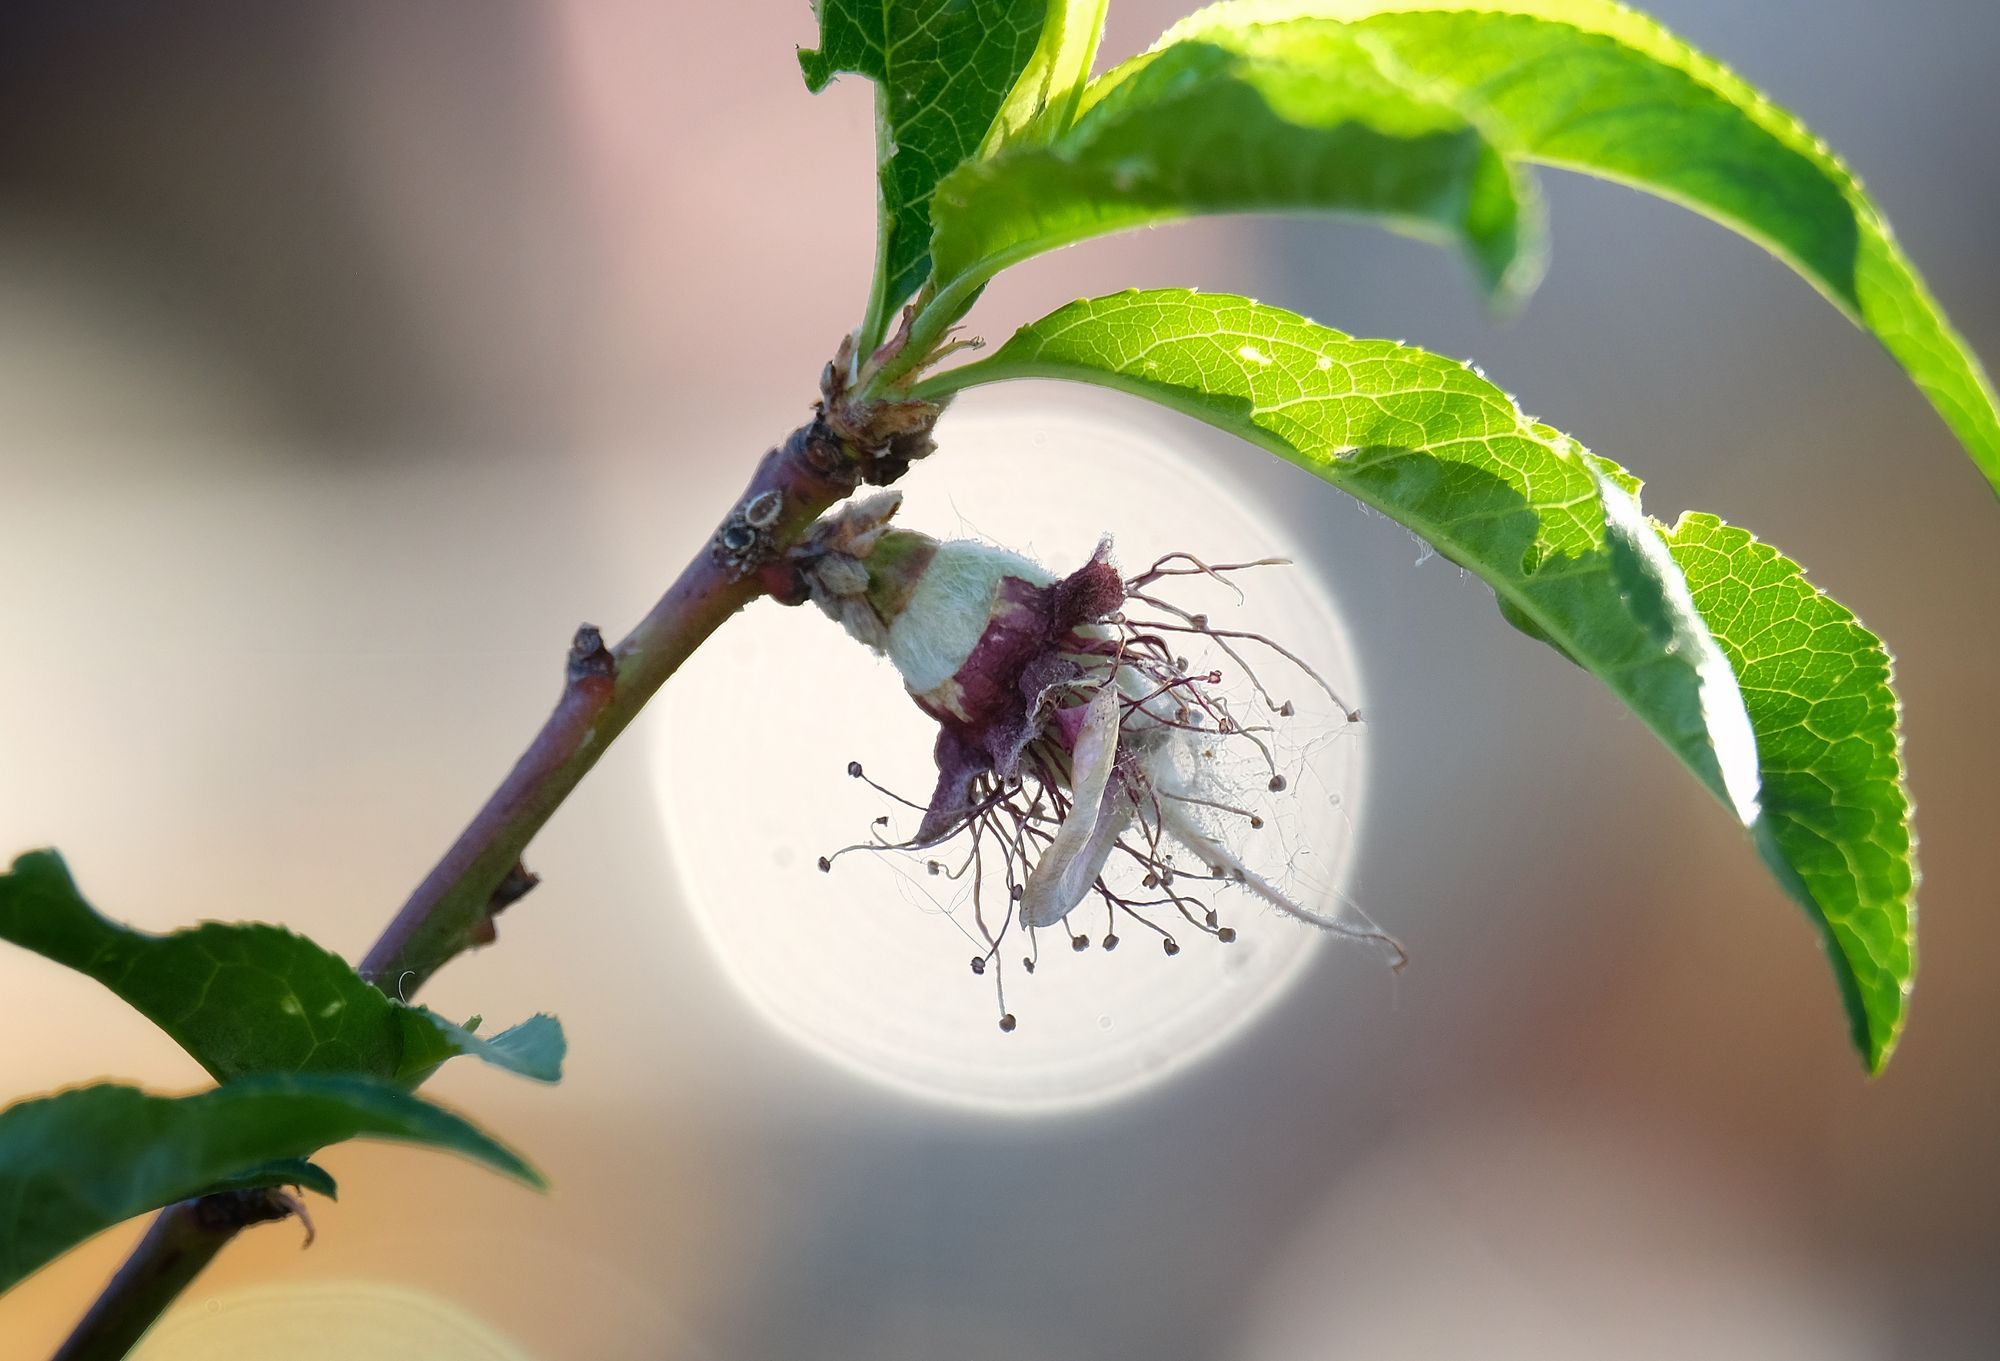 A close up image of a tiny peach fruit with its flower still on it, its leaves arching above like an umbrella 